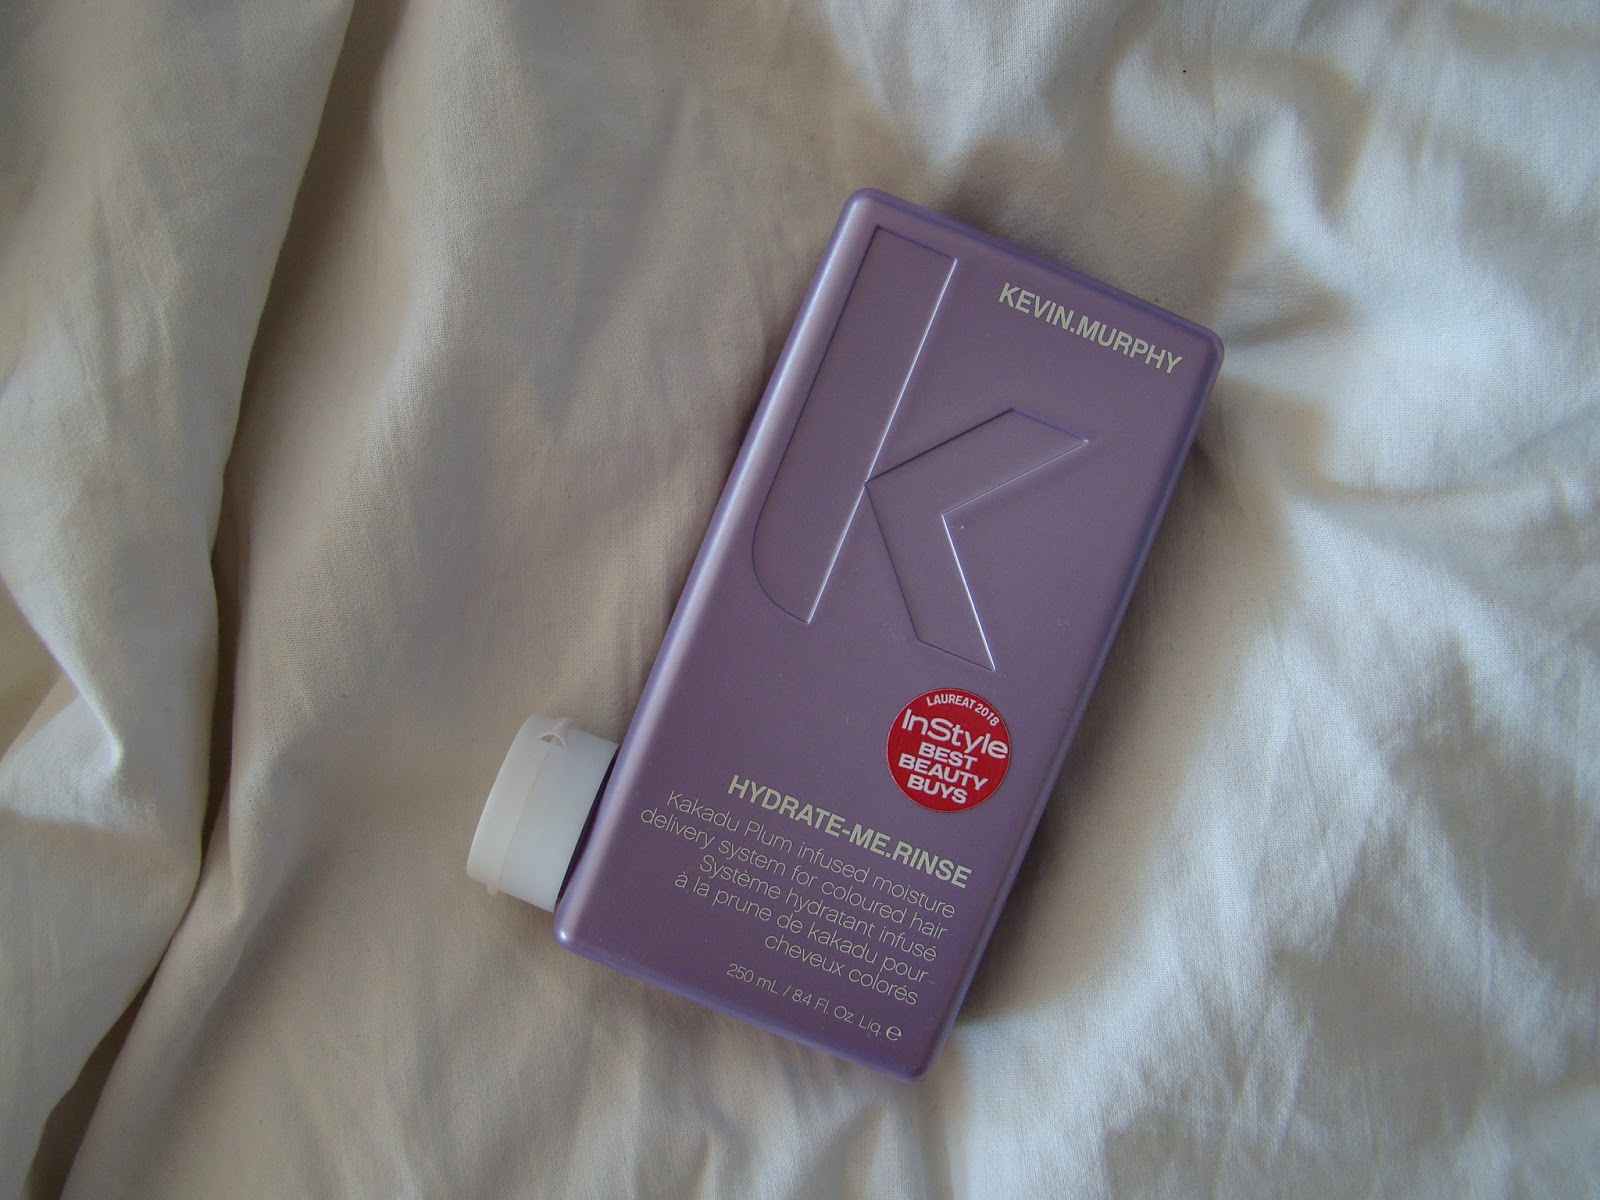 #138 Kevin.Murphy Hydrate-Me.Rinse conditioner review - My Vogue